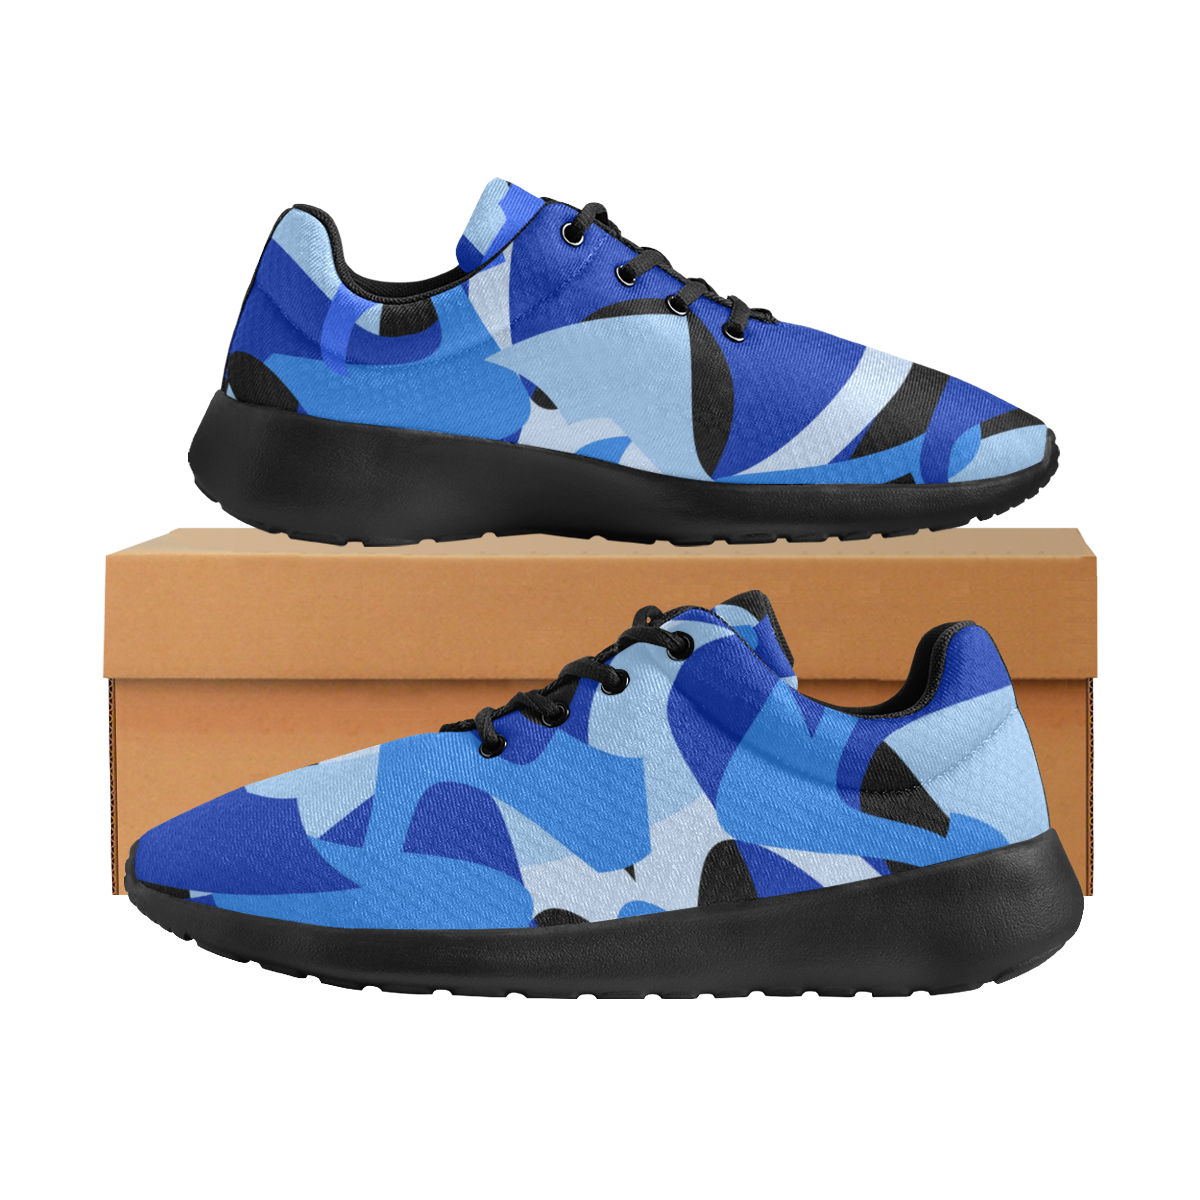 Camouflage Abstract Blue and Black Men's Athletic Shoes (Model 0200)